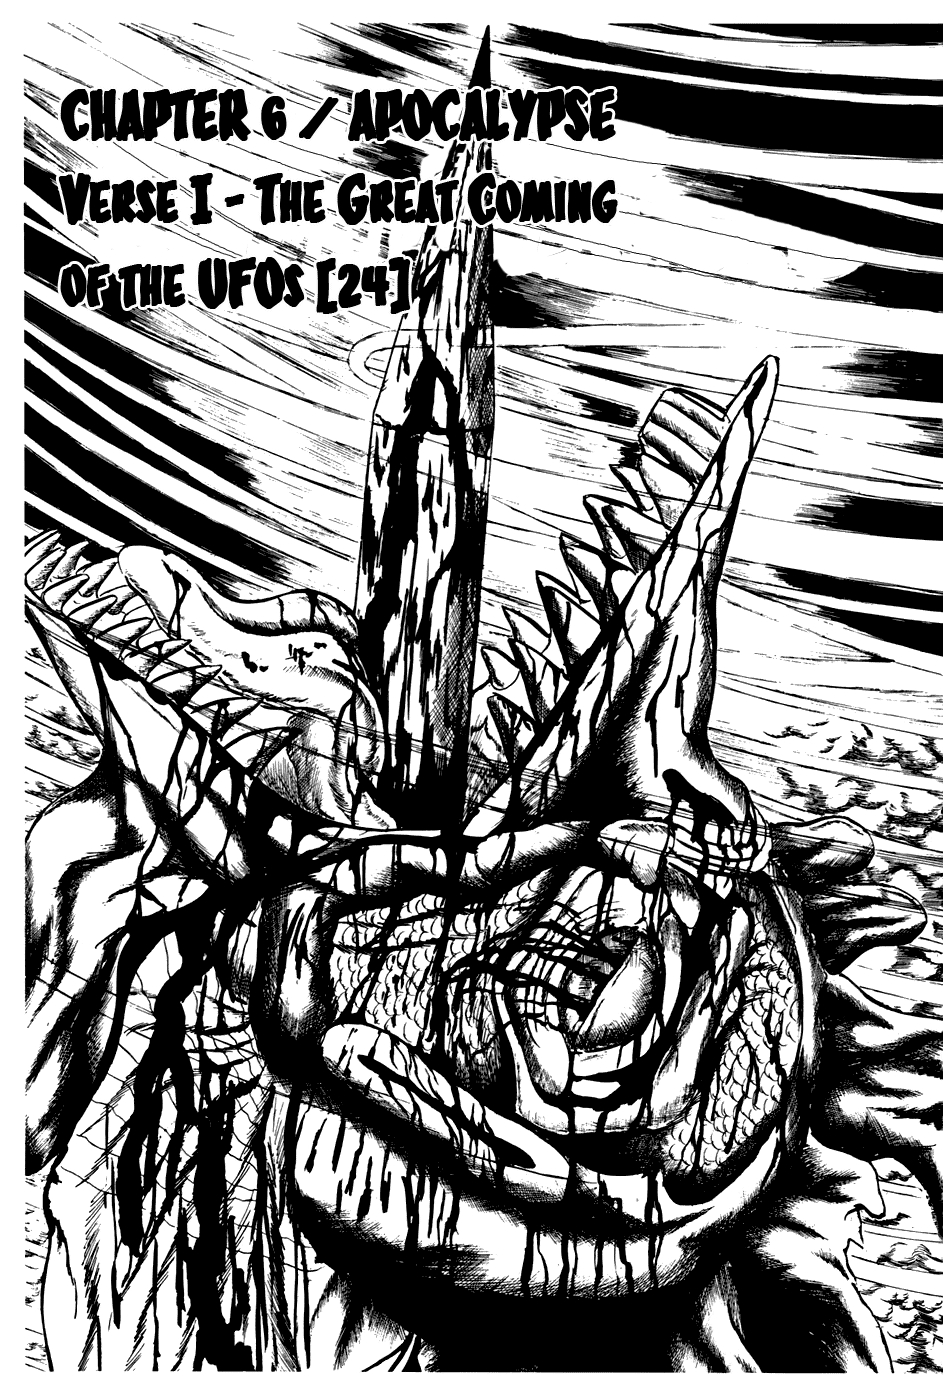 Fourteen Vol. 9 Ch. 176 Apocalypse Verse I The Great Coming of the UFOs (24)